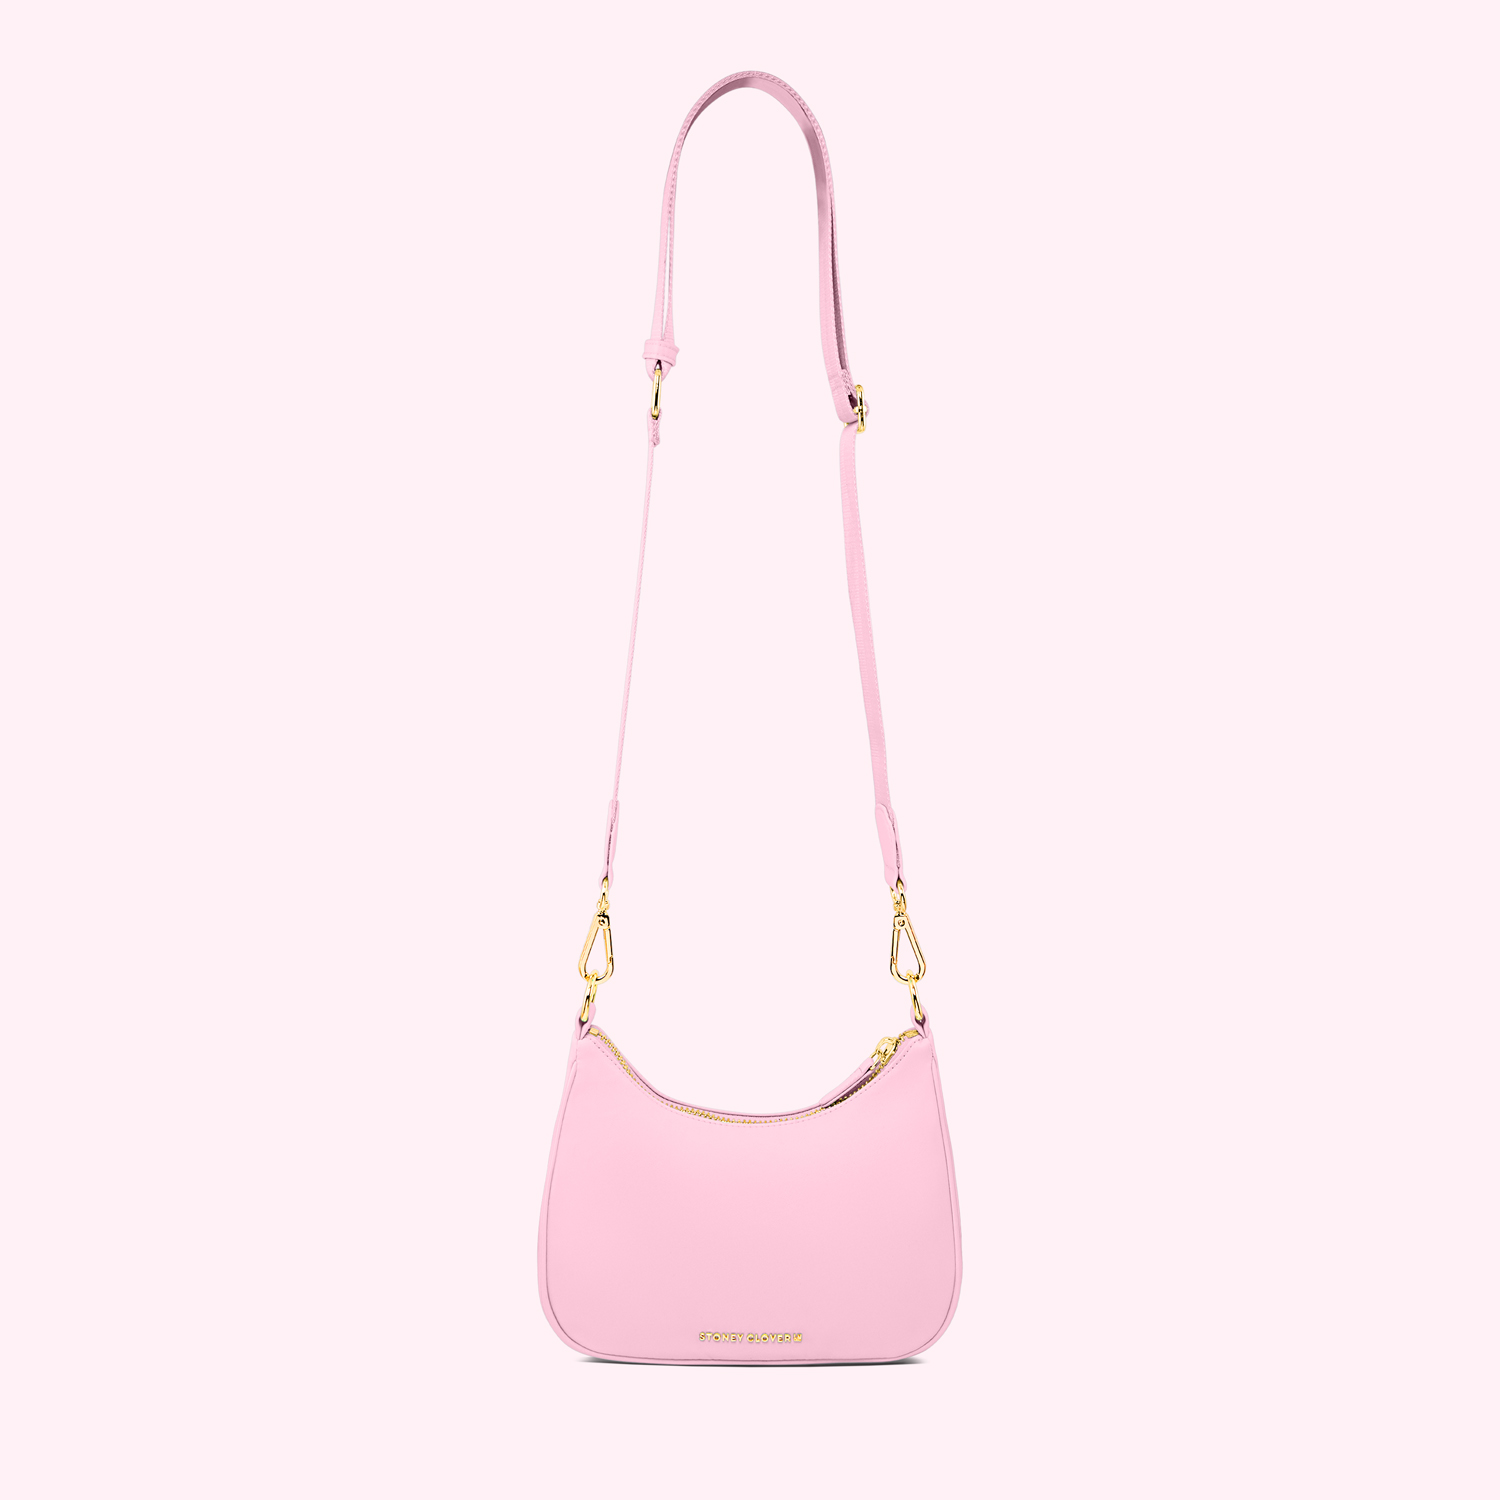 Kate Spade Sam The Little Better Nylon North/south Phone Crossbody in Pink